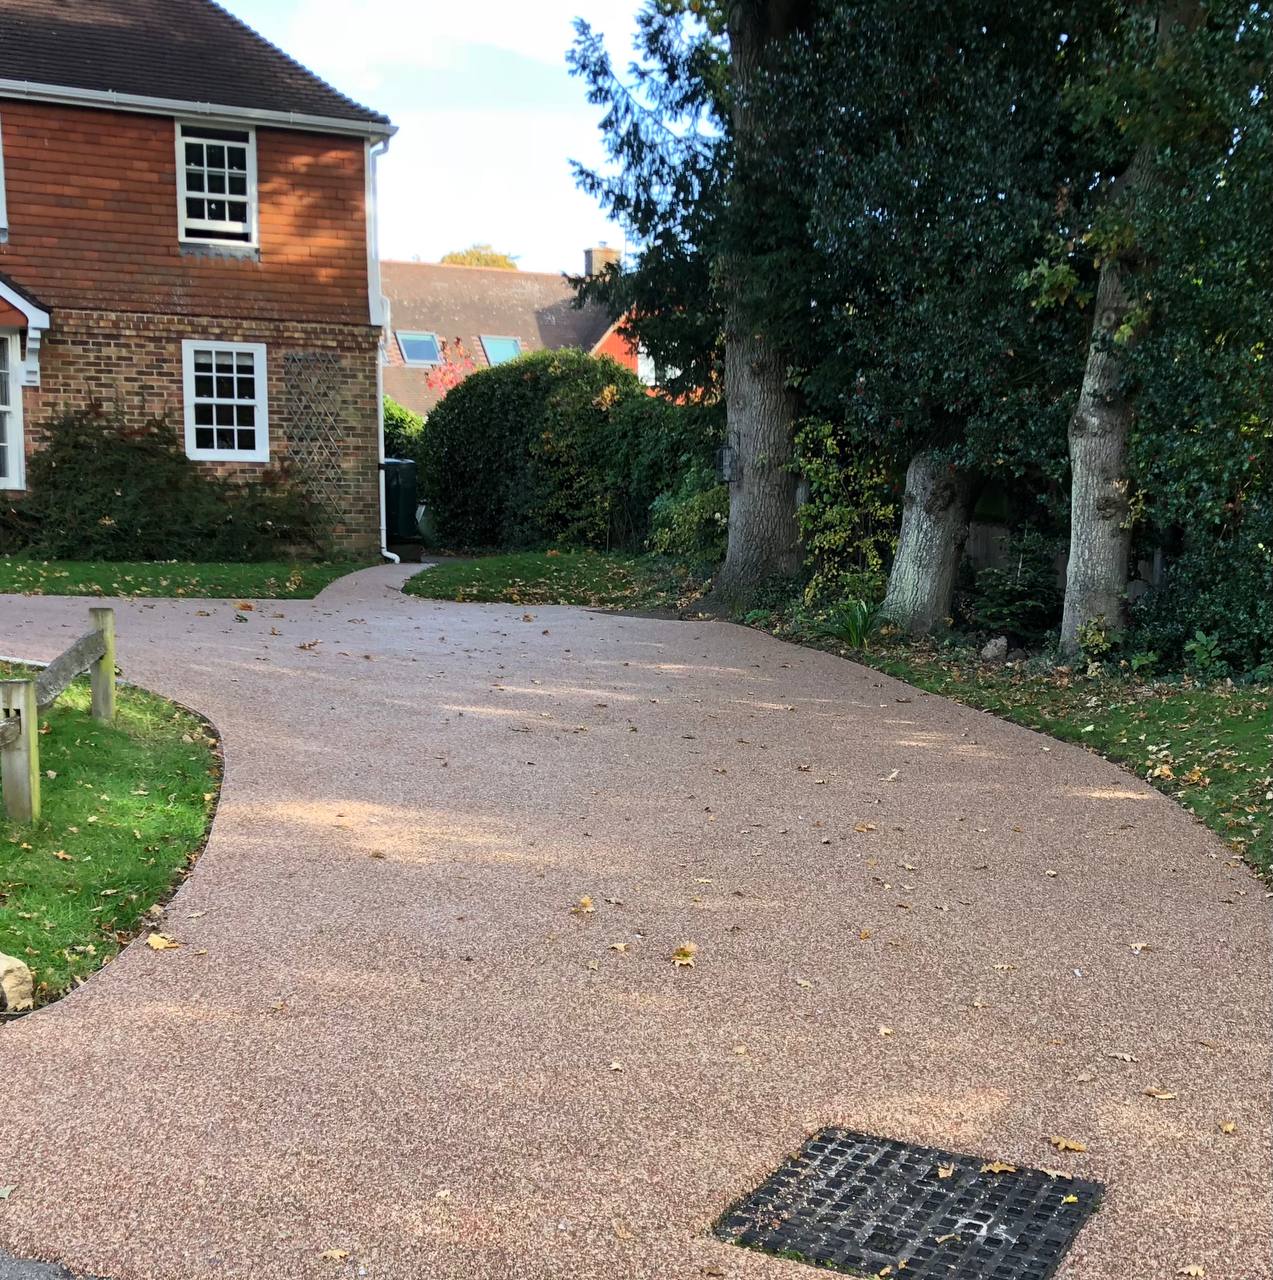 This is a photo of a Resin bound driveway carried out in a district of Wirral. All works done by Resin Driveways Wirral